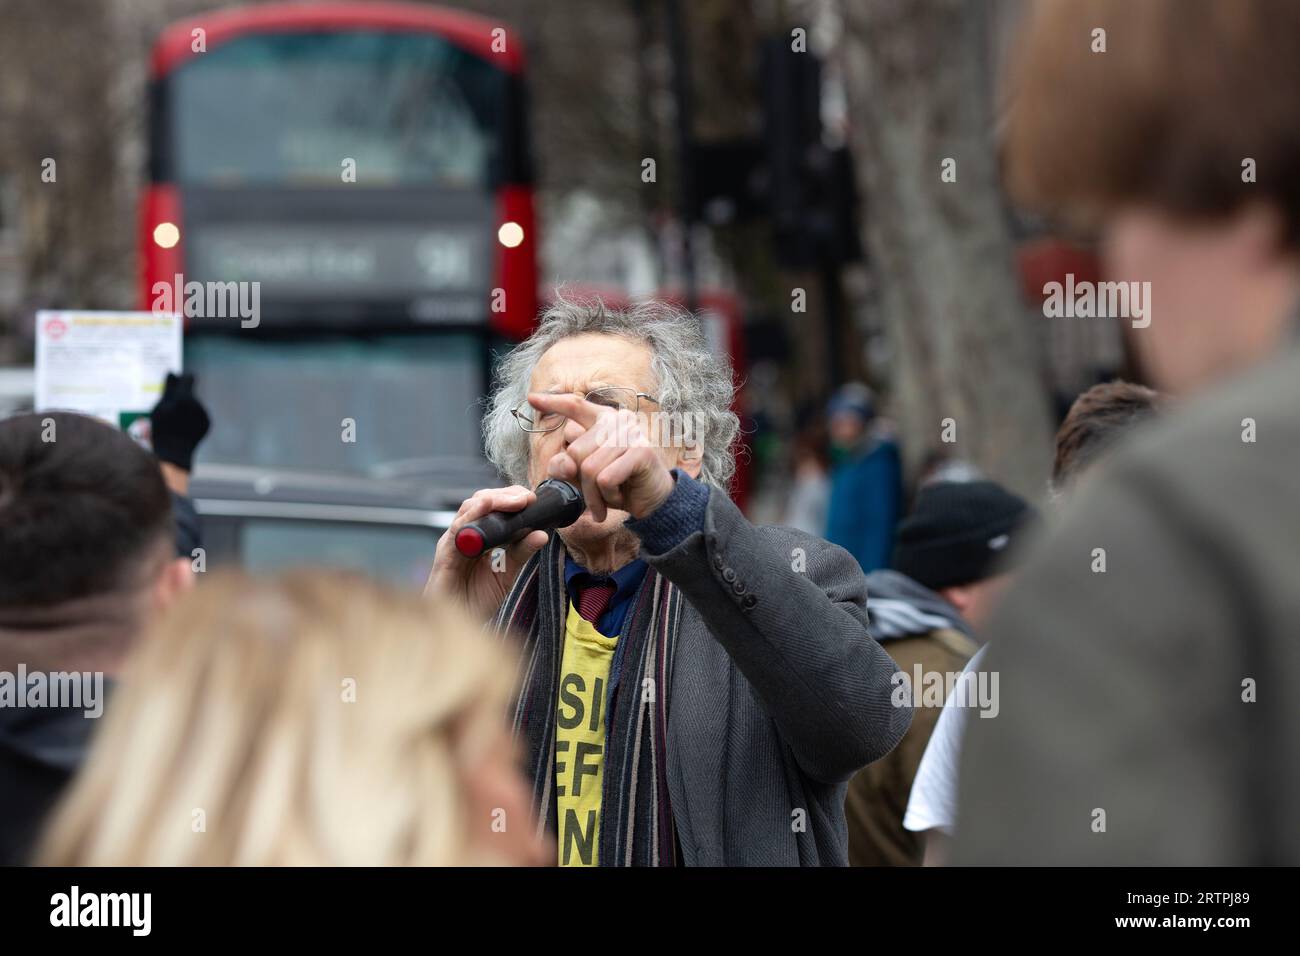 Piers Corbyn, brother of former Labour Party leader Jeremy Corbyn, addresses the crowd during a protest against the expansion of ULEZ in London. Stock Photo